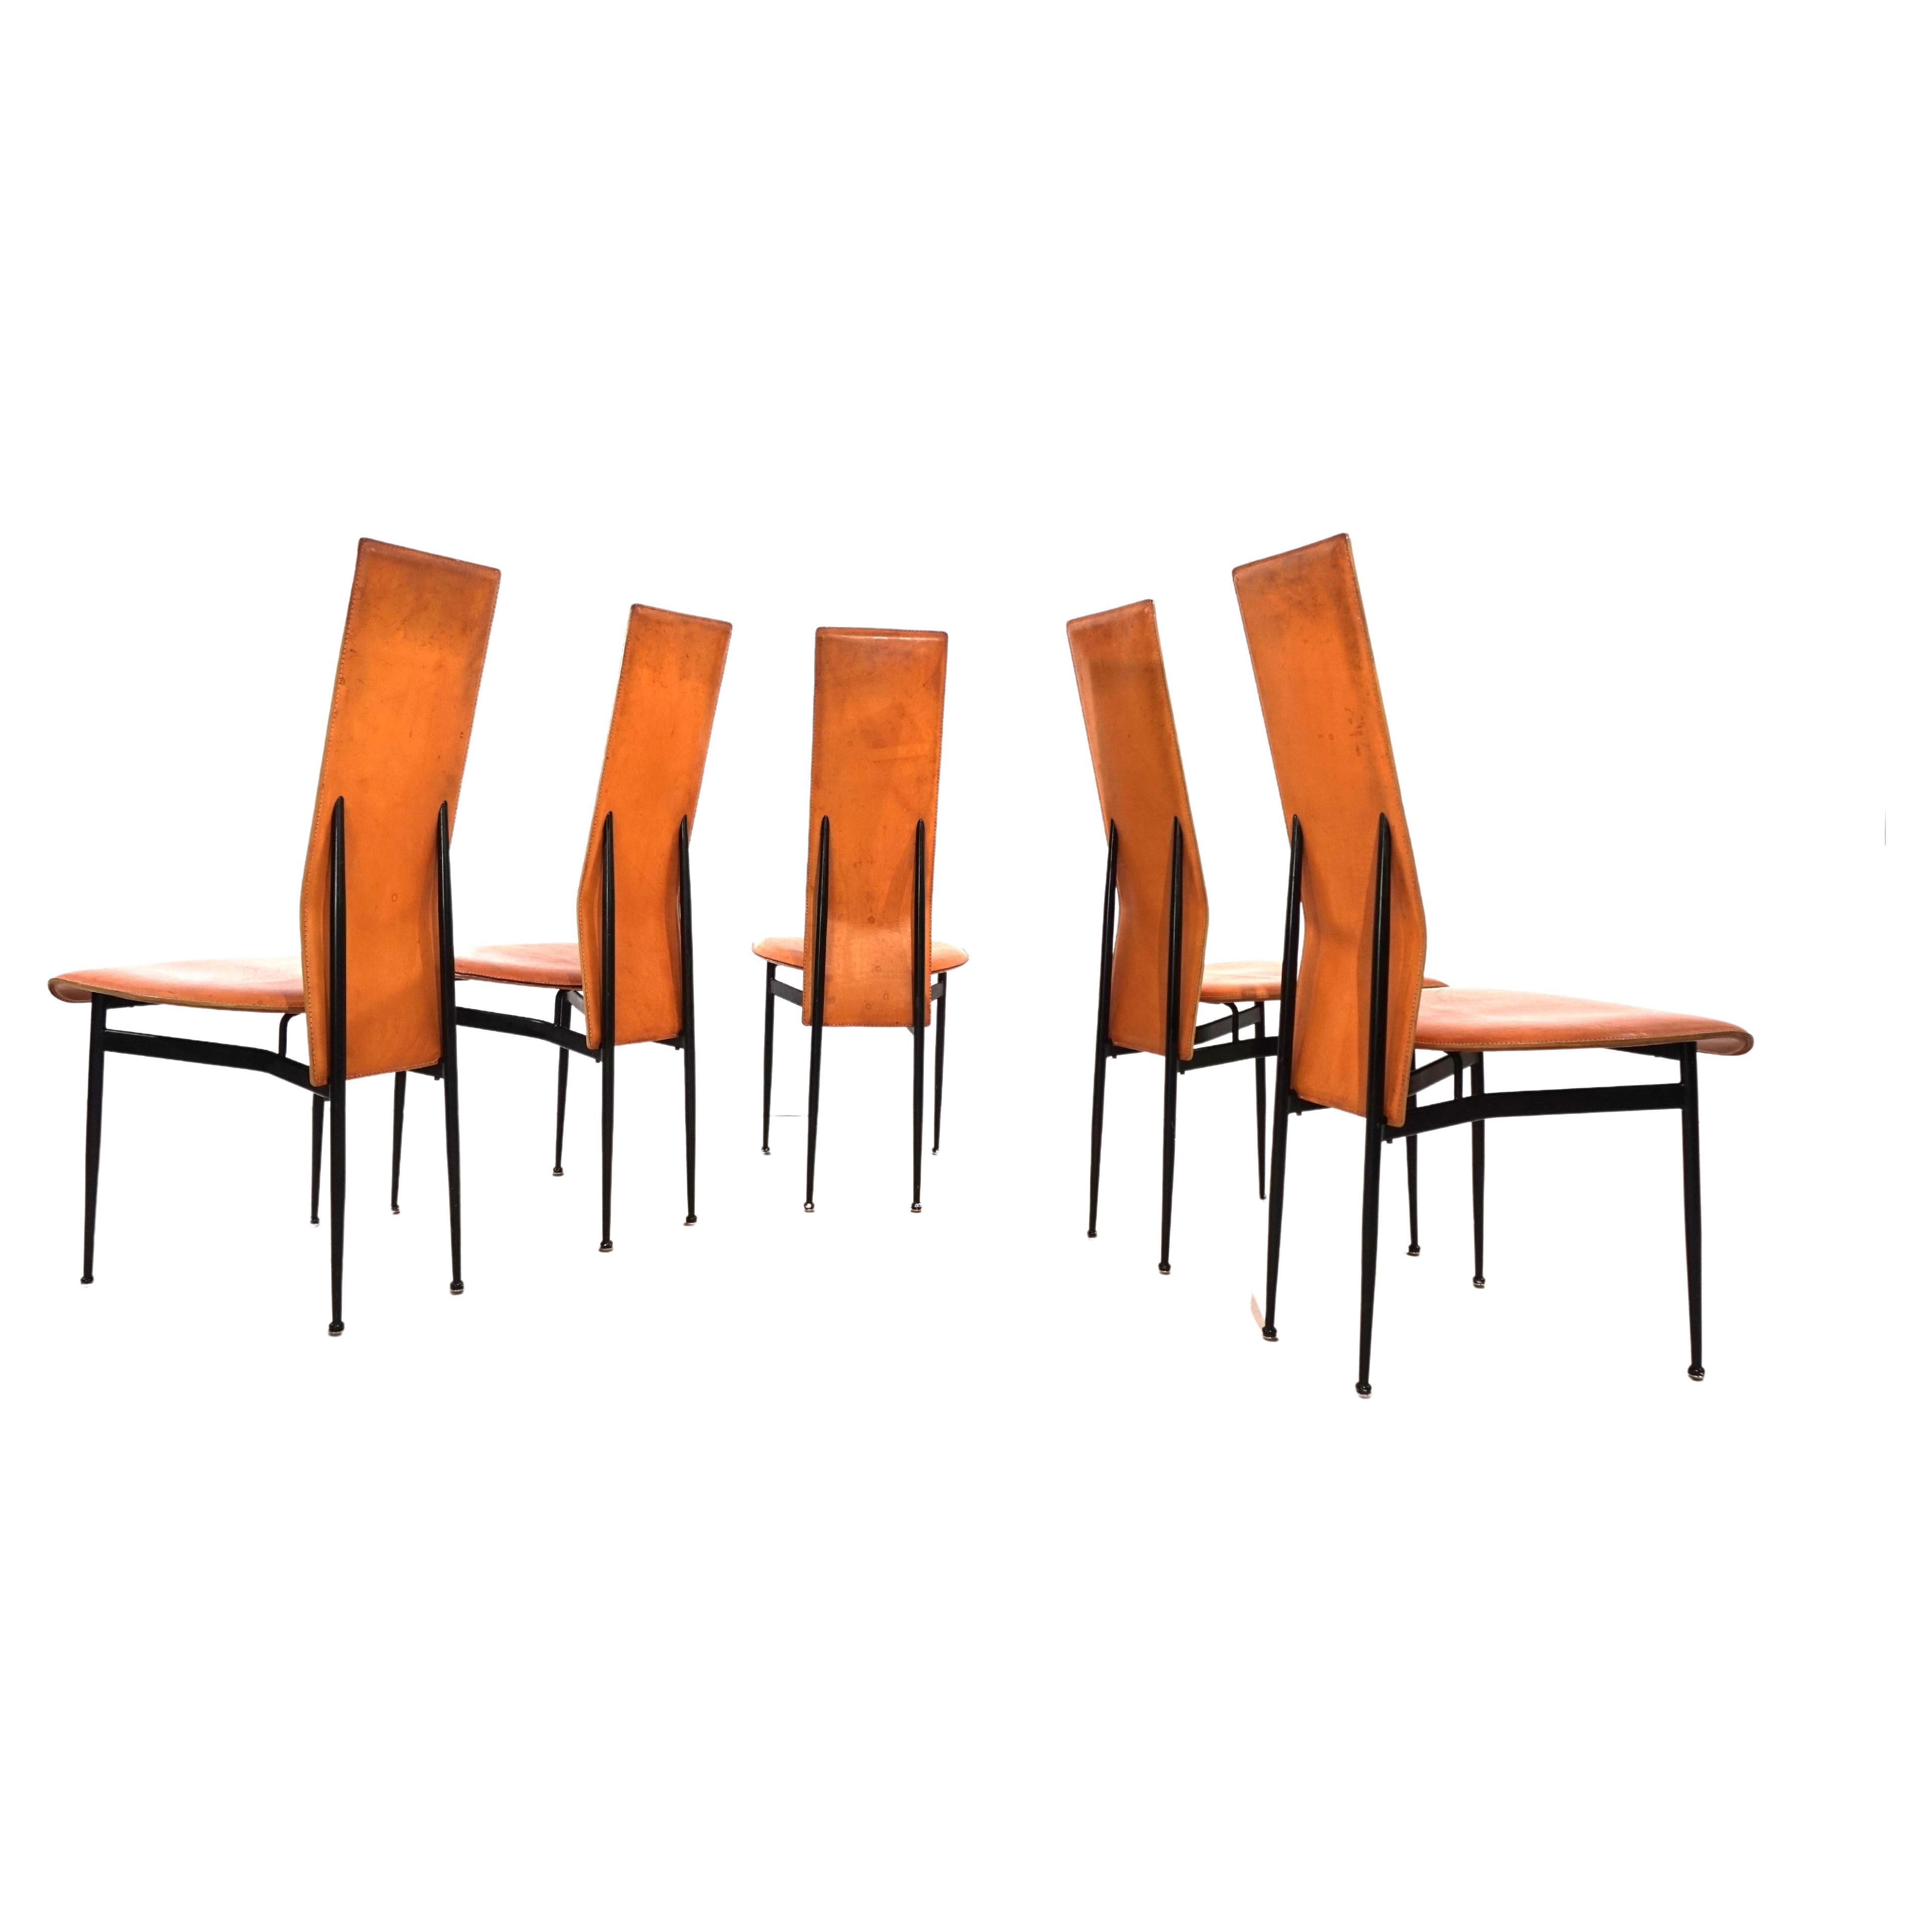 Set of 5 Fasem S44 leather dining chairs by Giancarlo Vegni & Gualtierotti For Sale